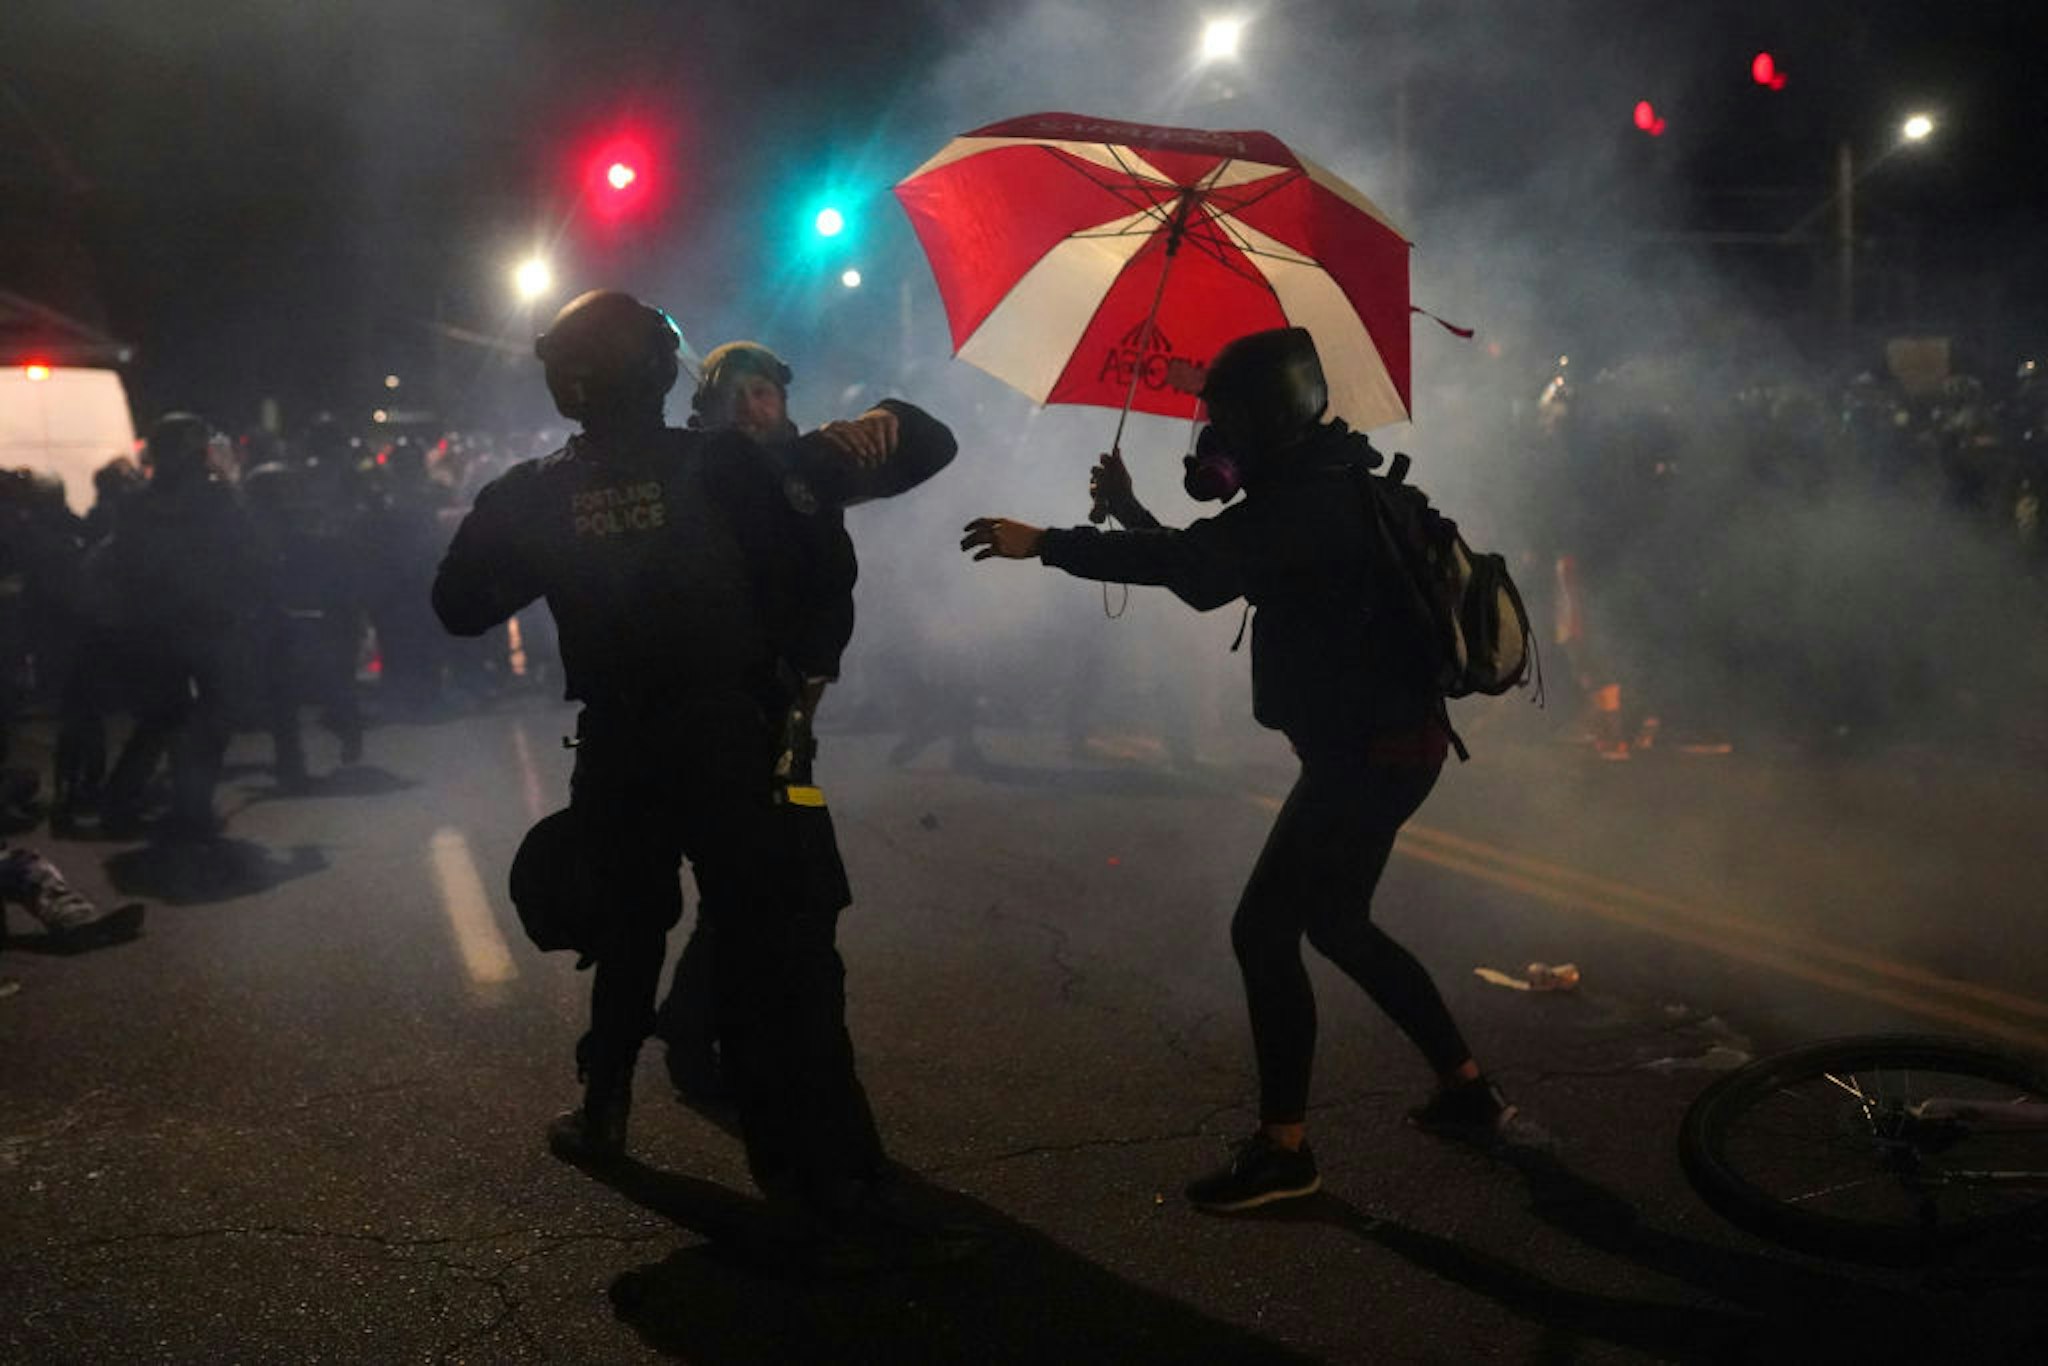 PORTLAND, OR - AUGUST 22: A Portland police officer struggles with a protester while dispersing a crowd from in front of the Multnomah County Sheriffs Office on August 22, 2020 in Portland, Oregon. Hundreds of protesters clashed with police Saturday night following a rally in east Portland. (Photo by Nathan Howard/Getty Images)